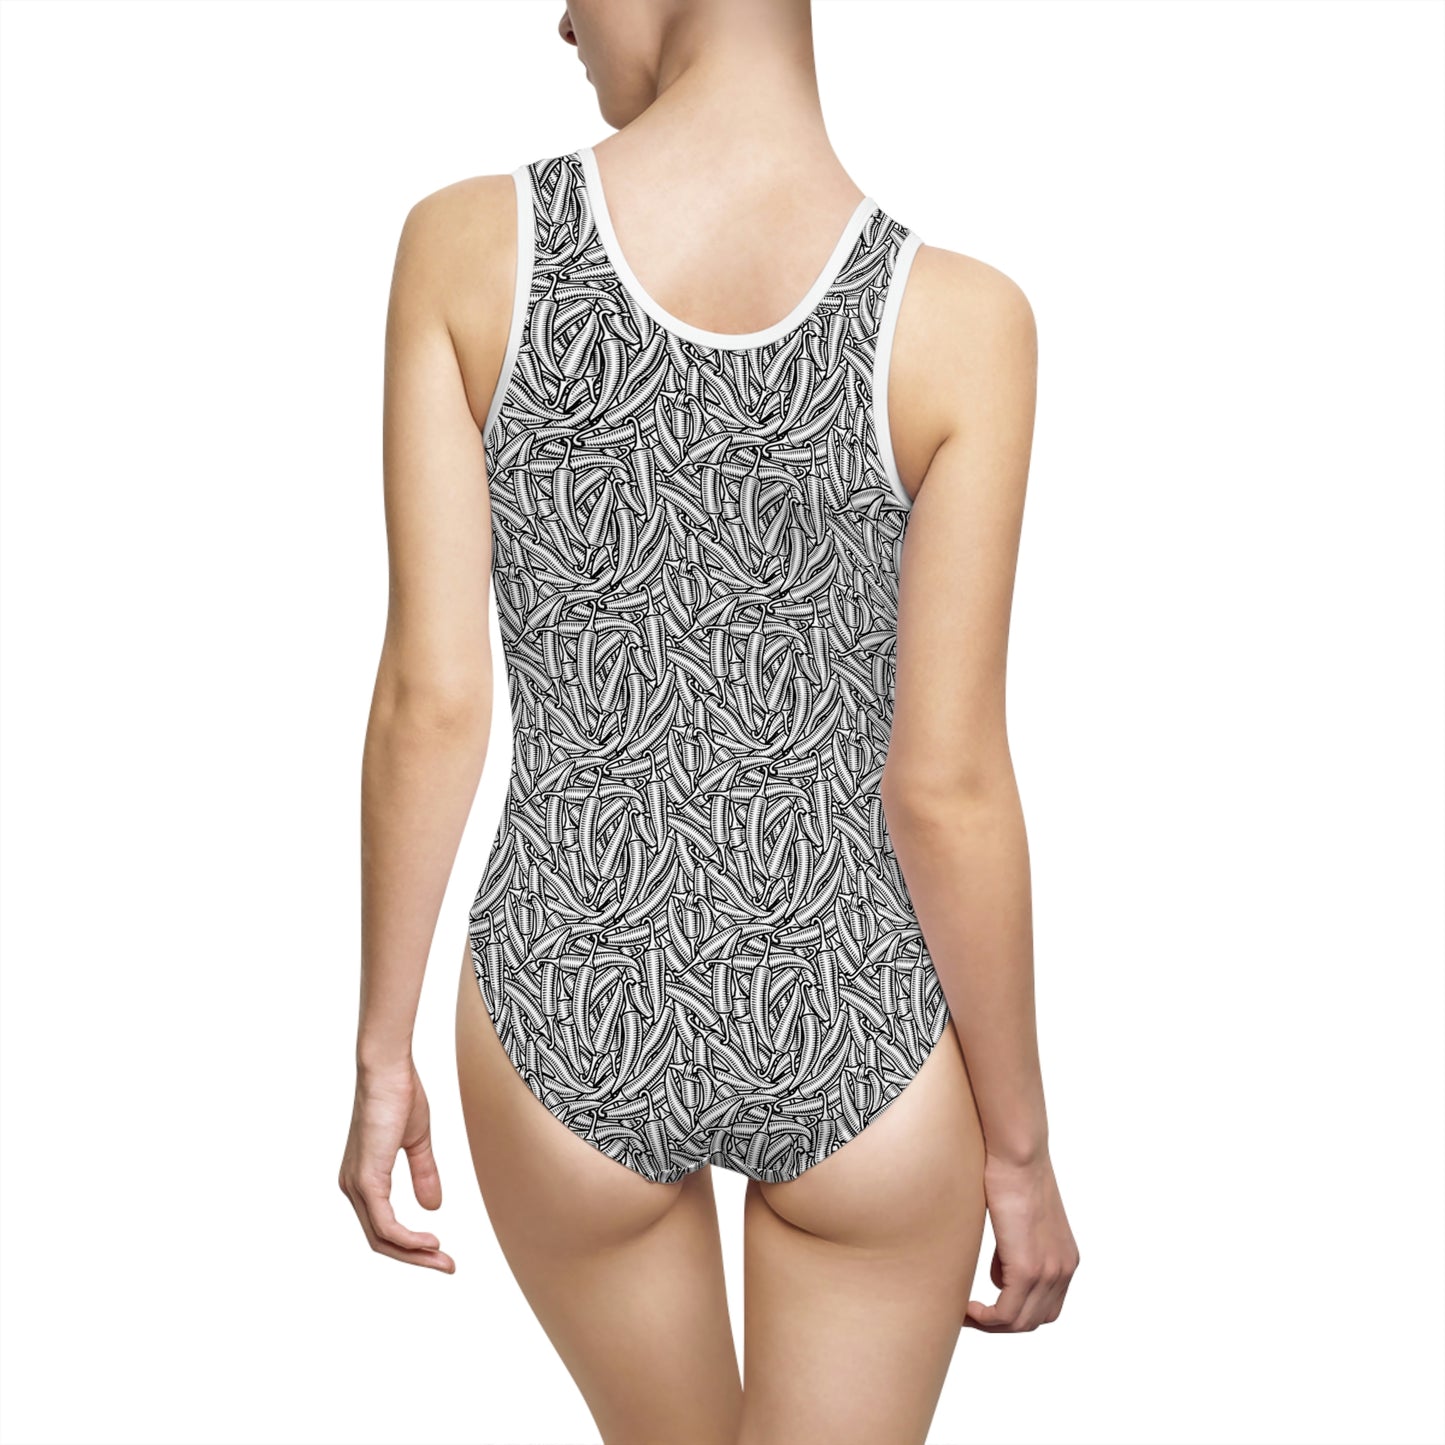 Add a little heat to the beach - Women's Classic One-Piece Swimsuit